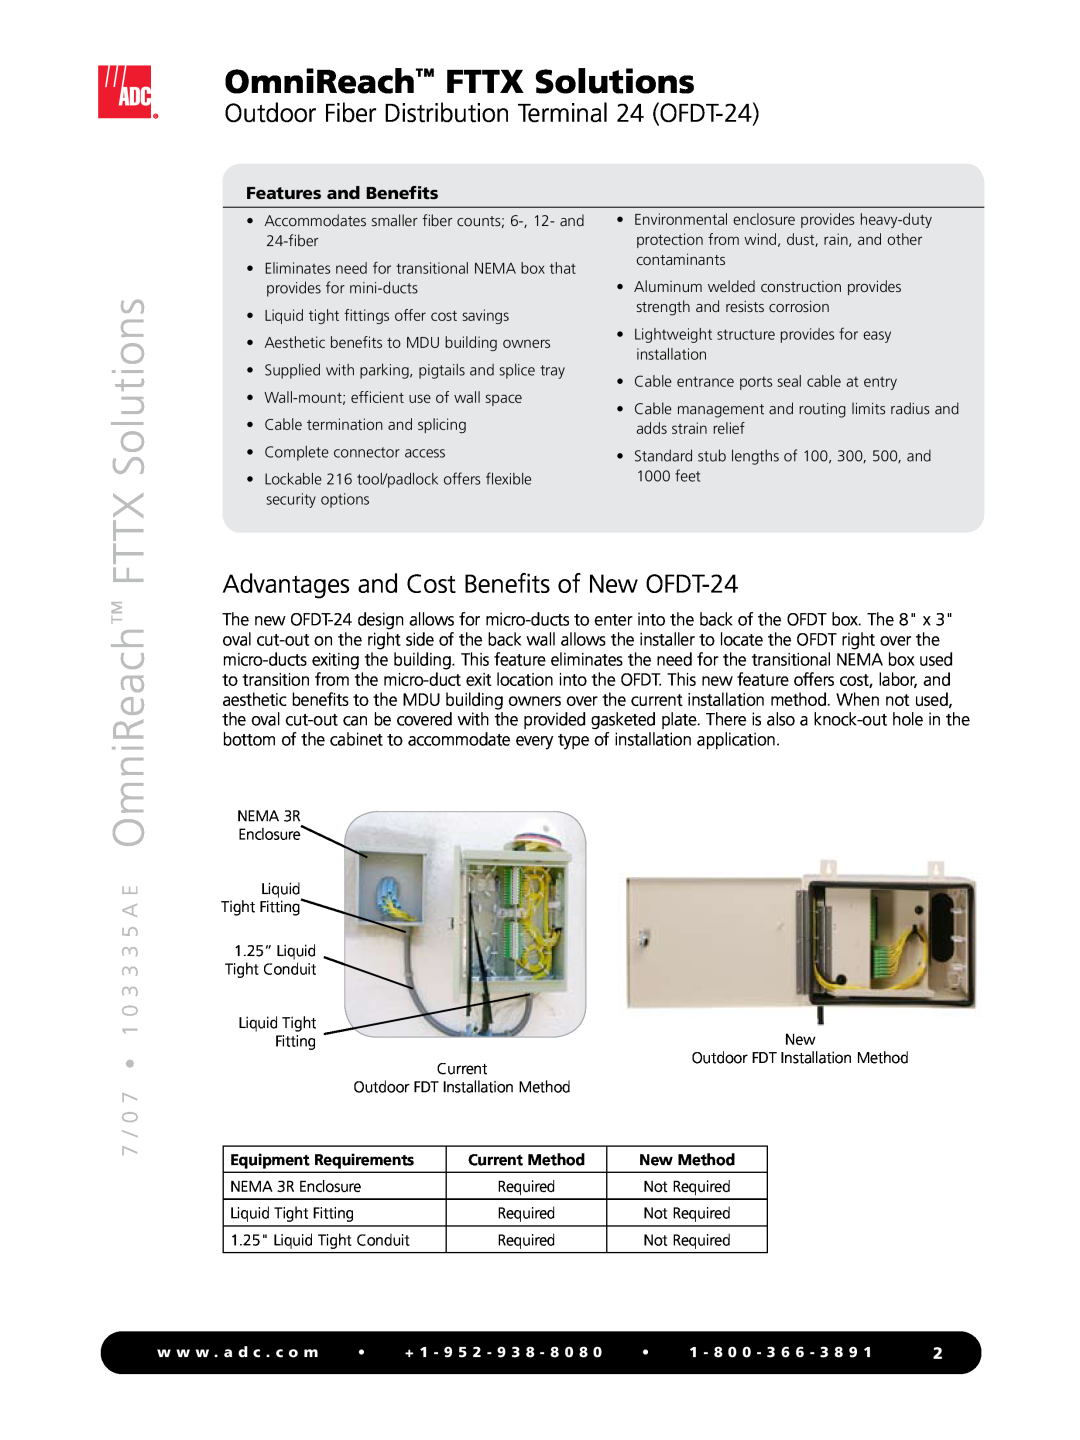 ADC manual FTTX Solutions, Advantages and Cost Benefits of New OFDT-24, 7 / 0 7 1 0 3 3 3 5 A E OmniReach 